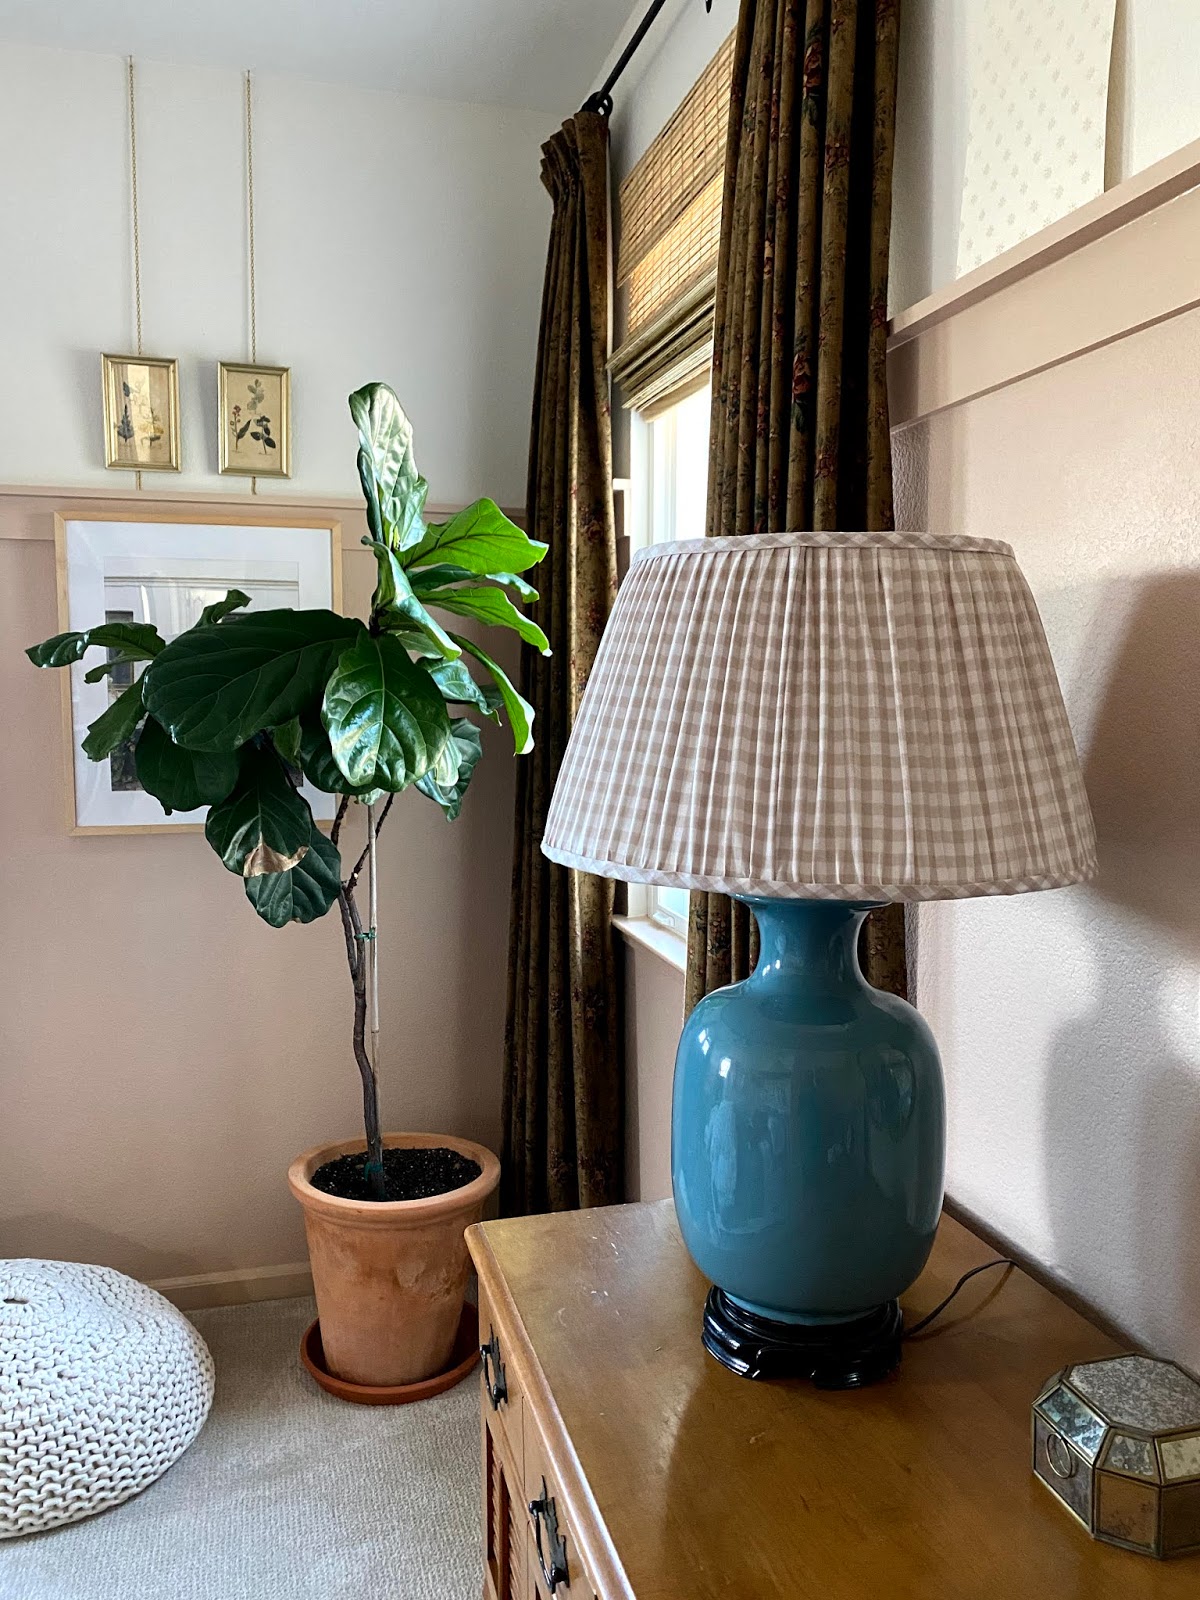 How to Make a Lampshade with Photos to Fabric Transfers